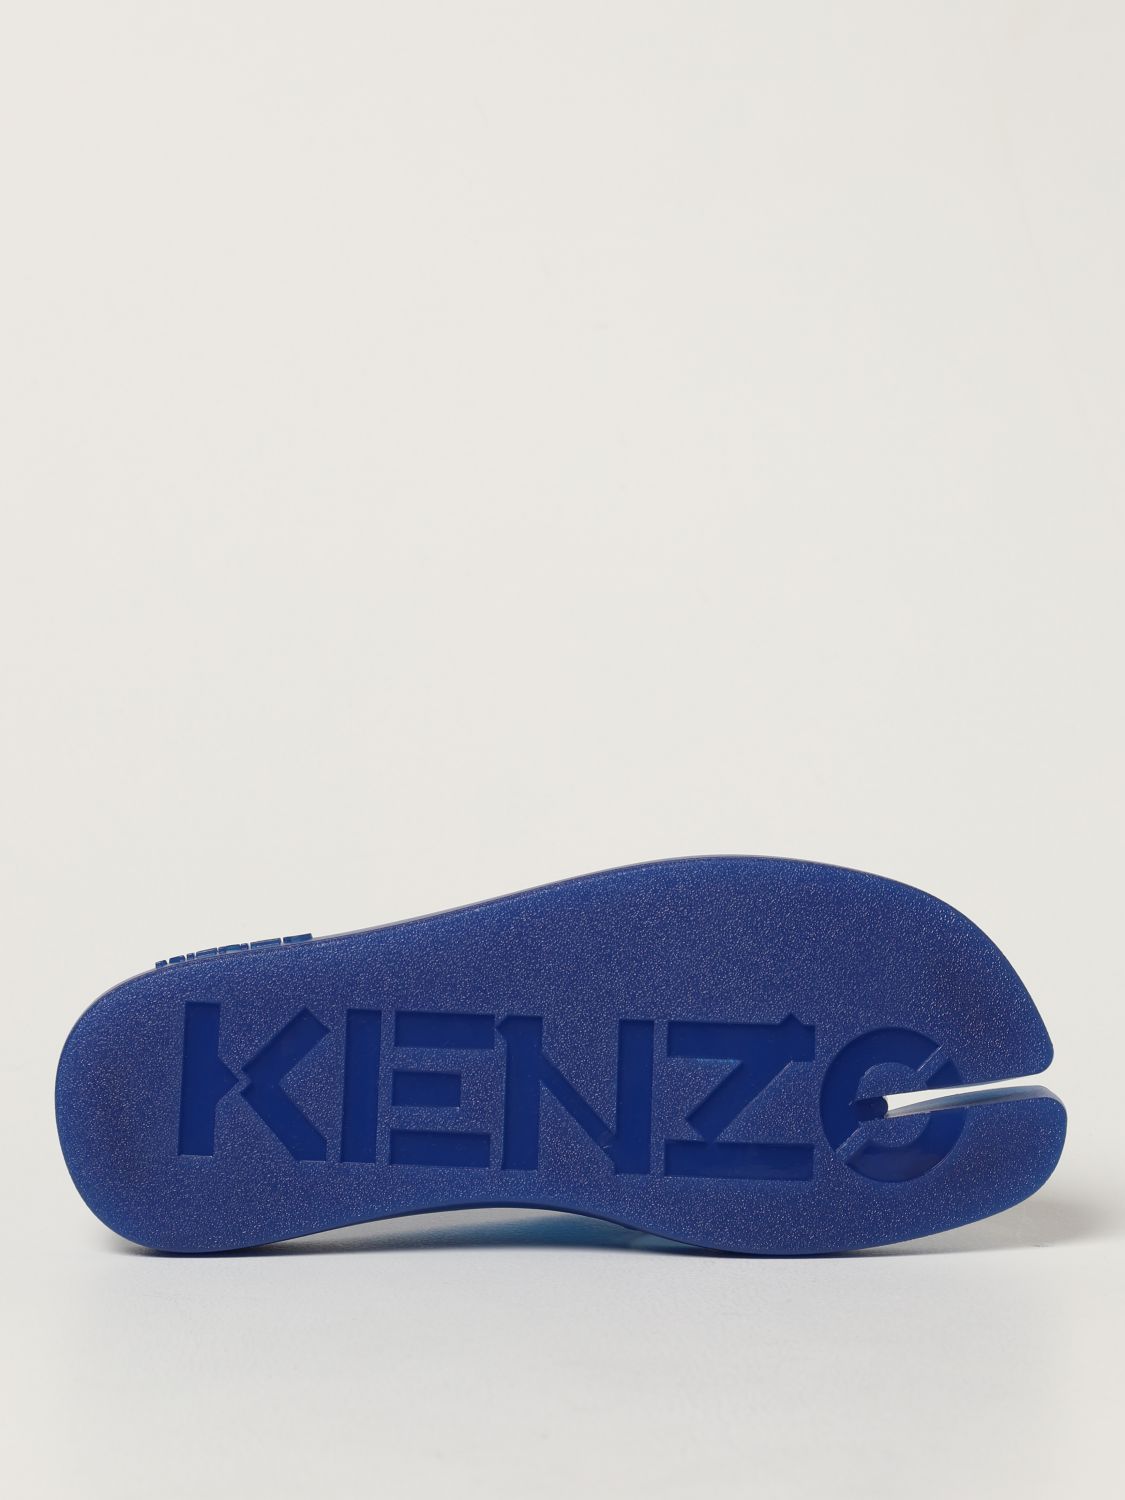 Sandals Kenzo: Kenzo rubber thong sandals blue 4